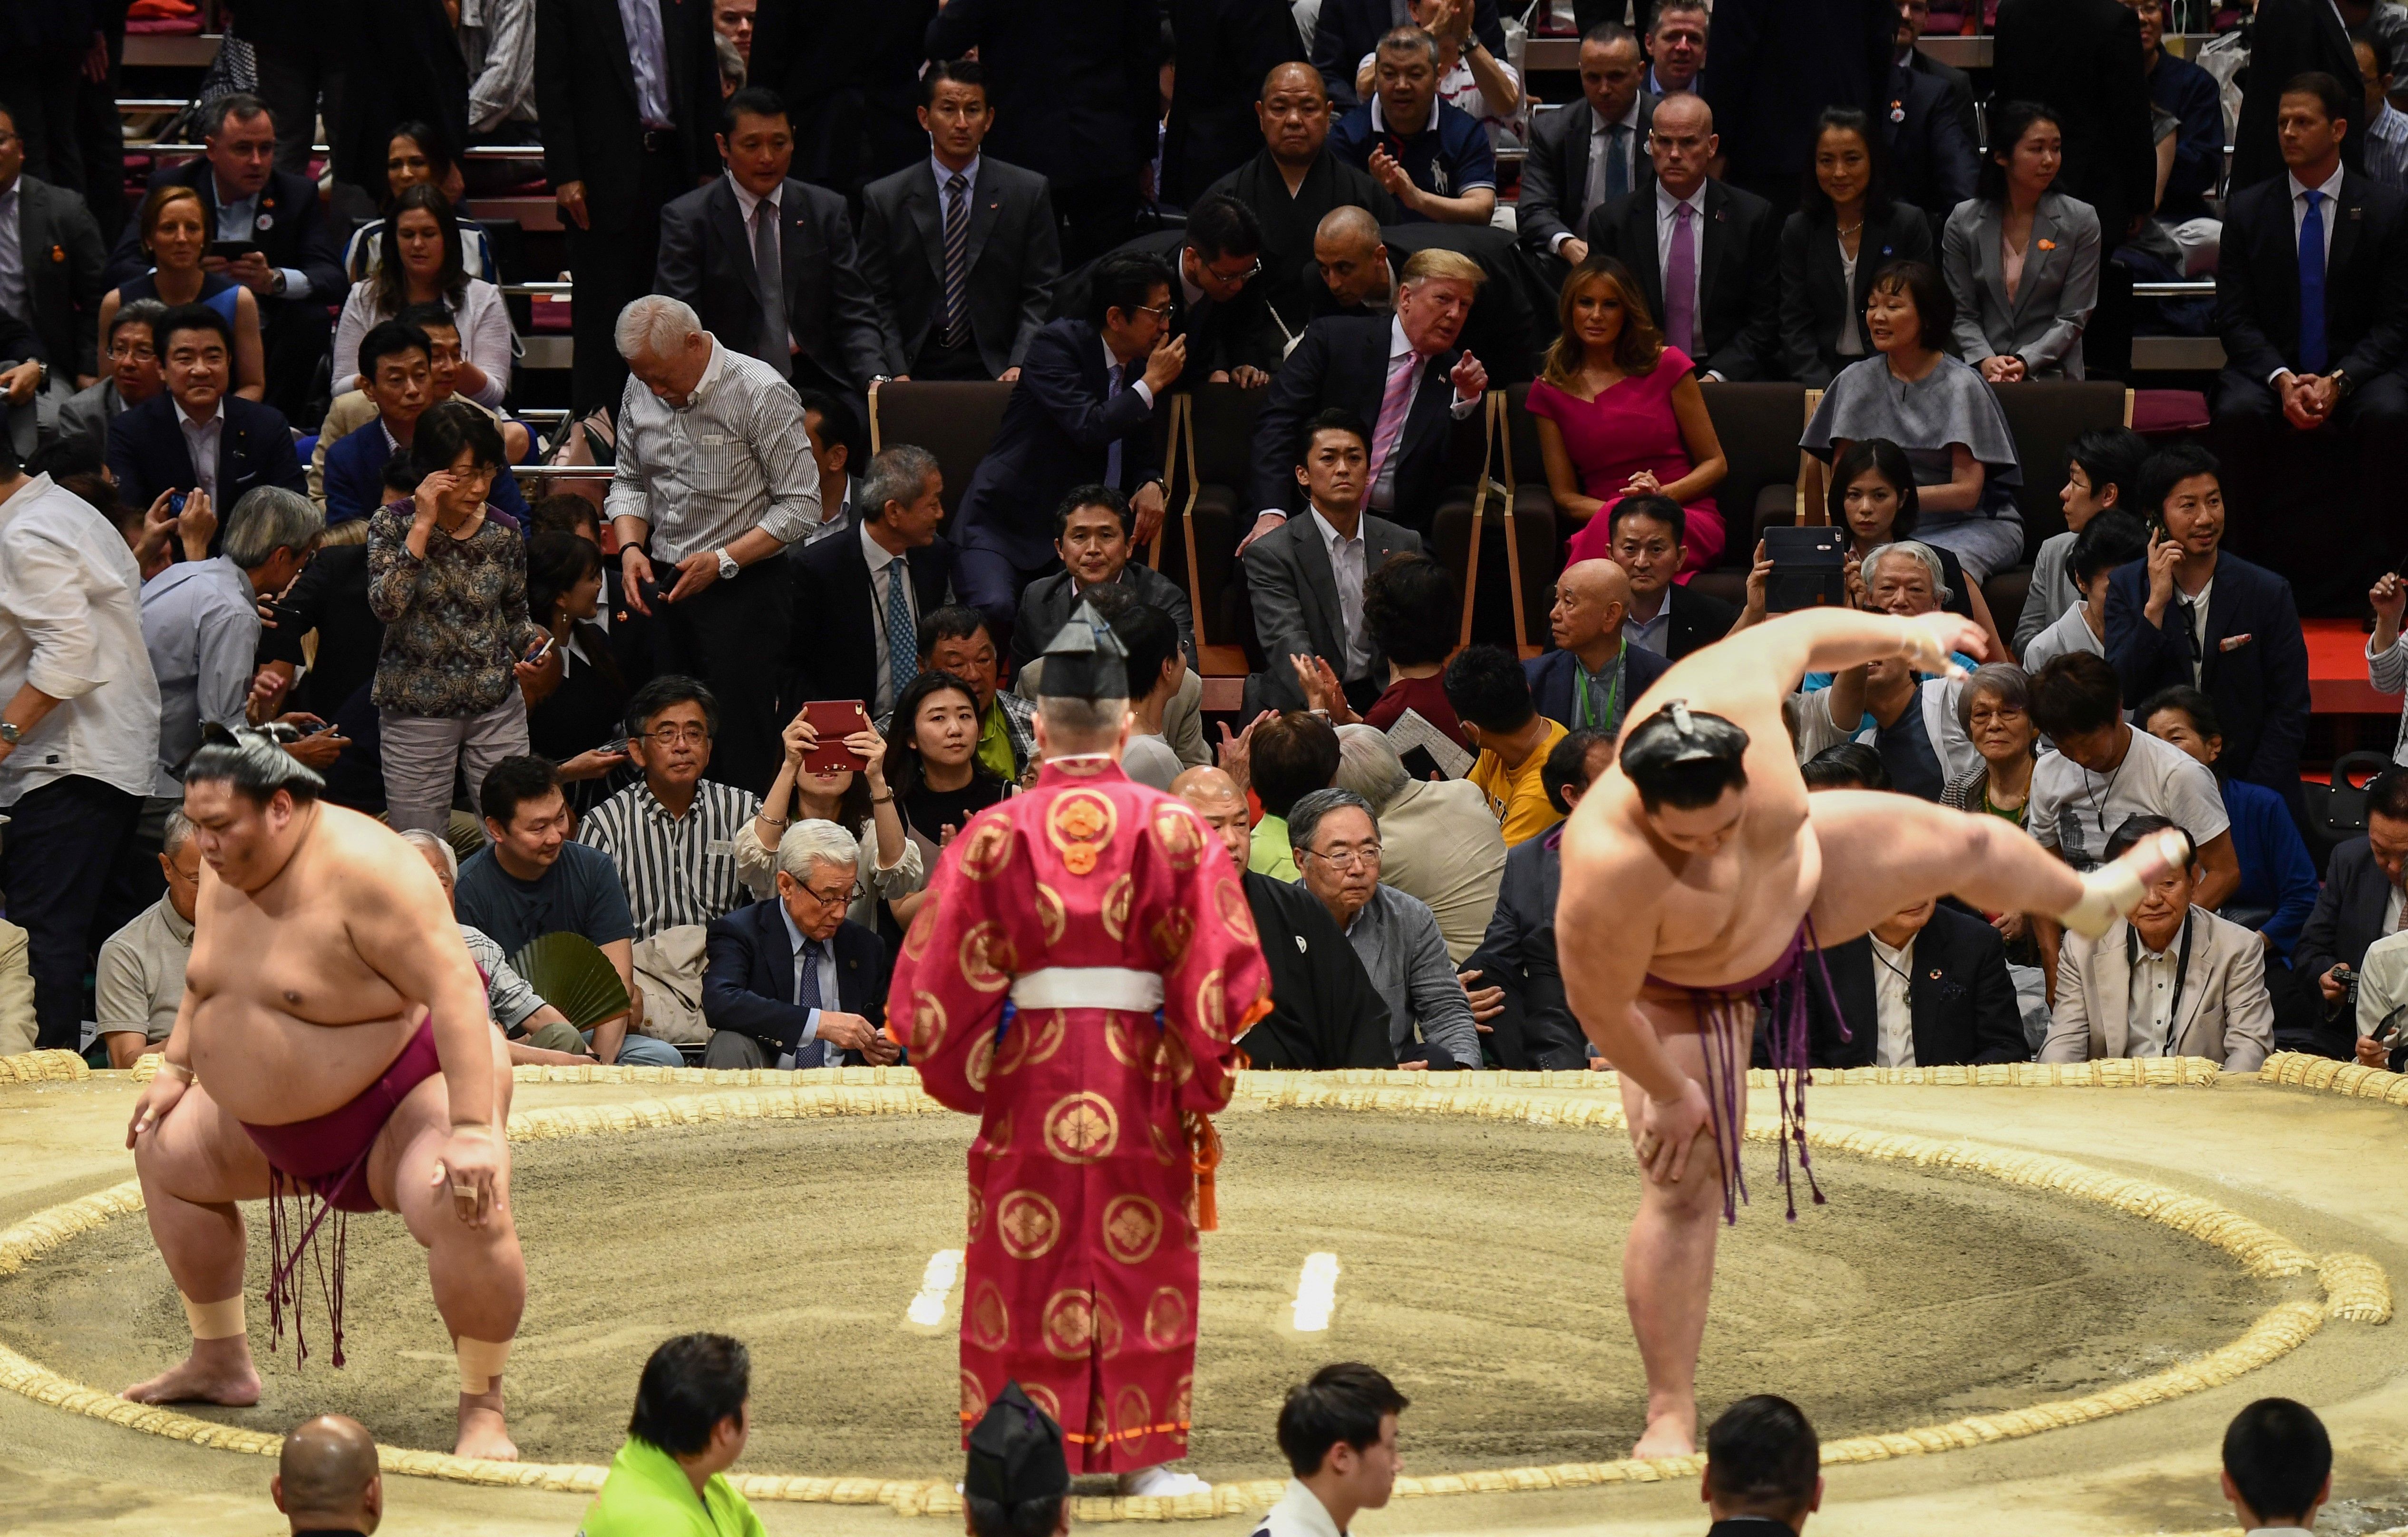 Trump and First Lady Melania Trump are accompanied by Japan's Prime Minister Shinzo Abe and his wife Akie Abe (centre row) during the Summer Grand Sumo Tournament in Tokyo on May 26, 2019.